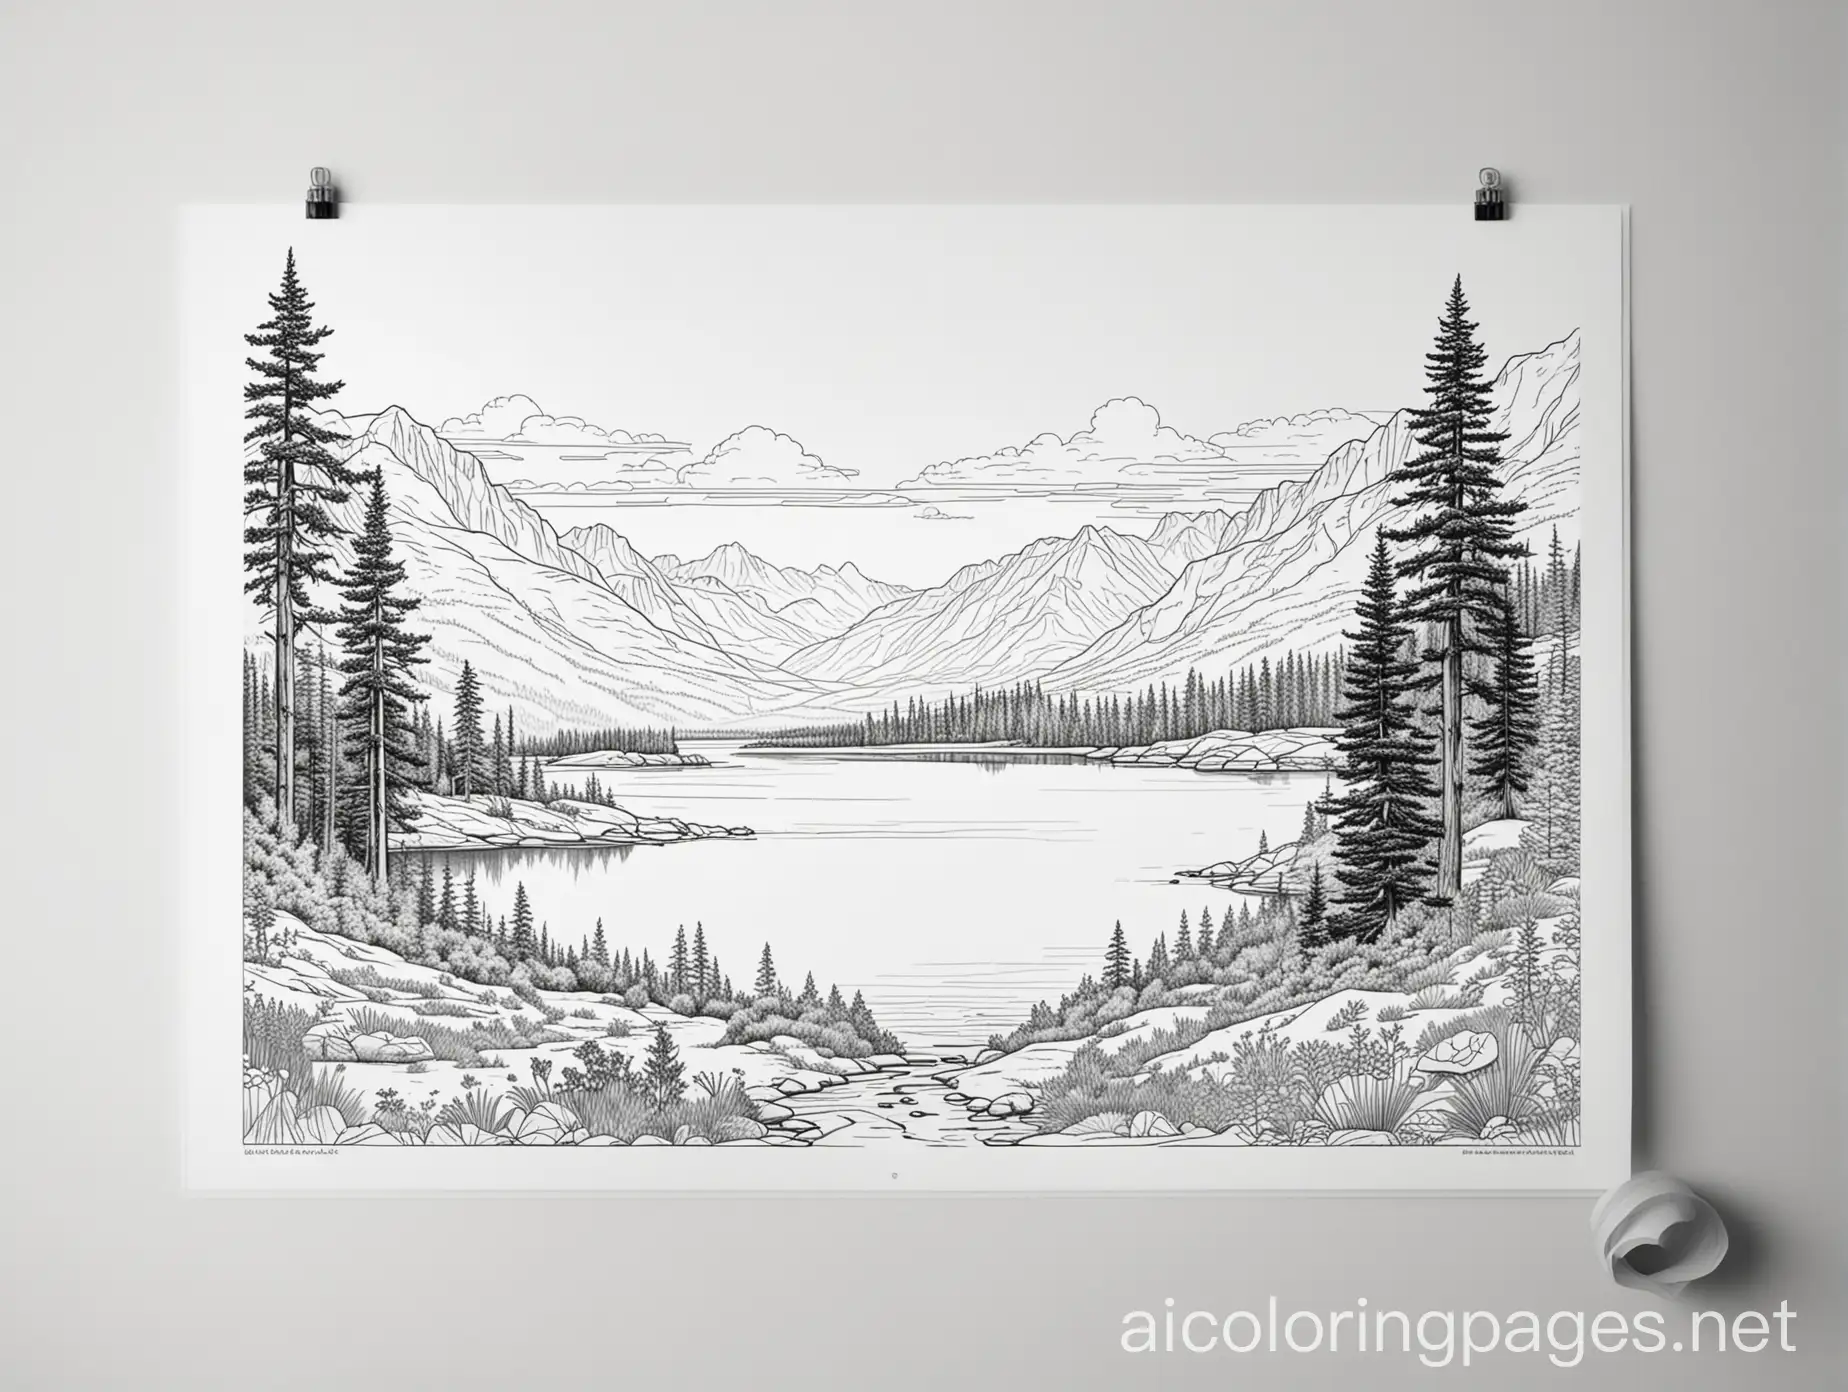 British-Columbia-Scenery-Coloring-Page-Tranquil-Line-Art-with-Ample-White-Space